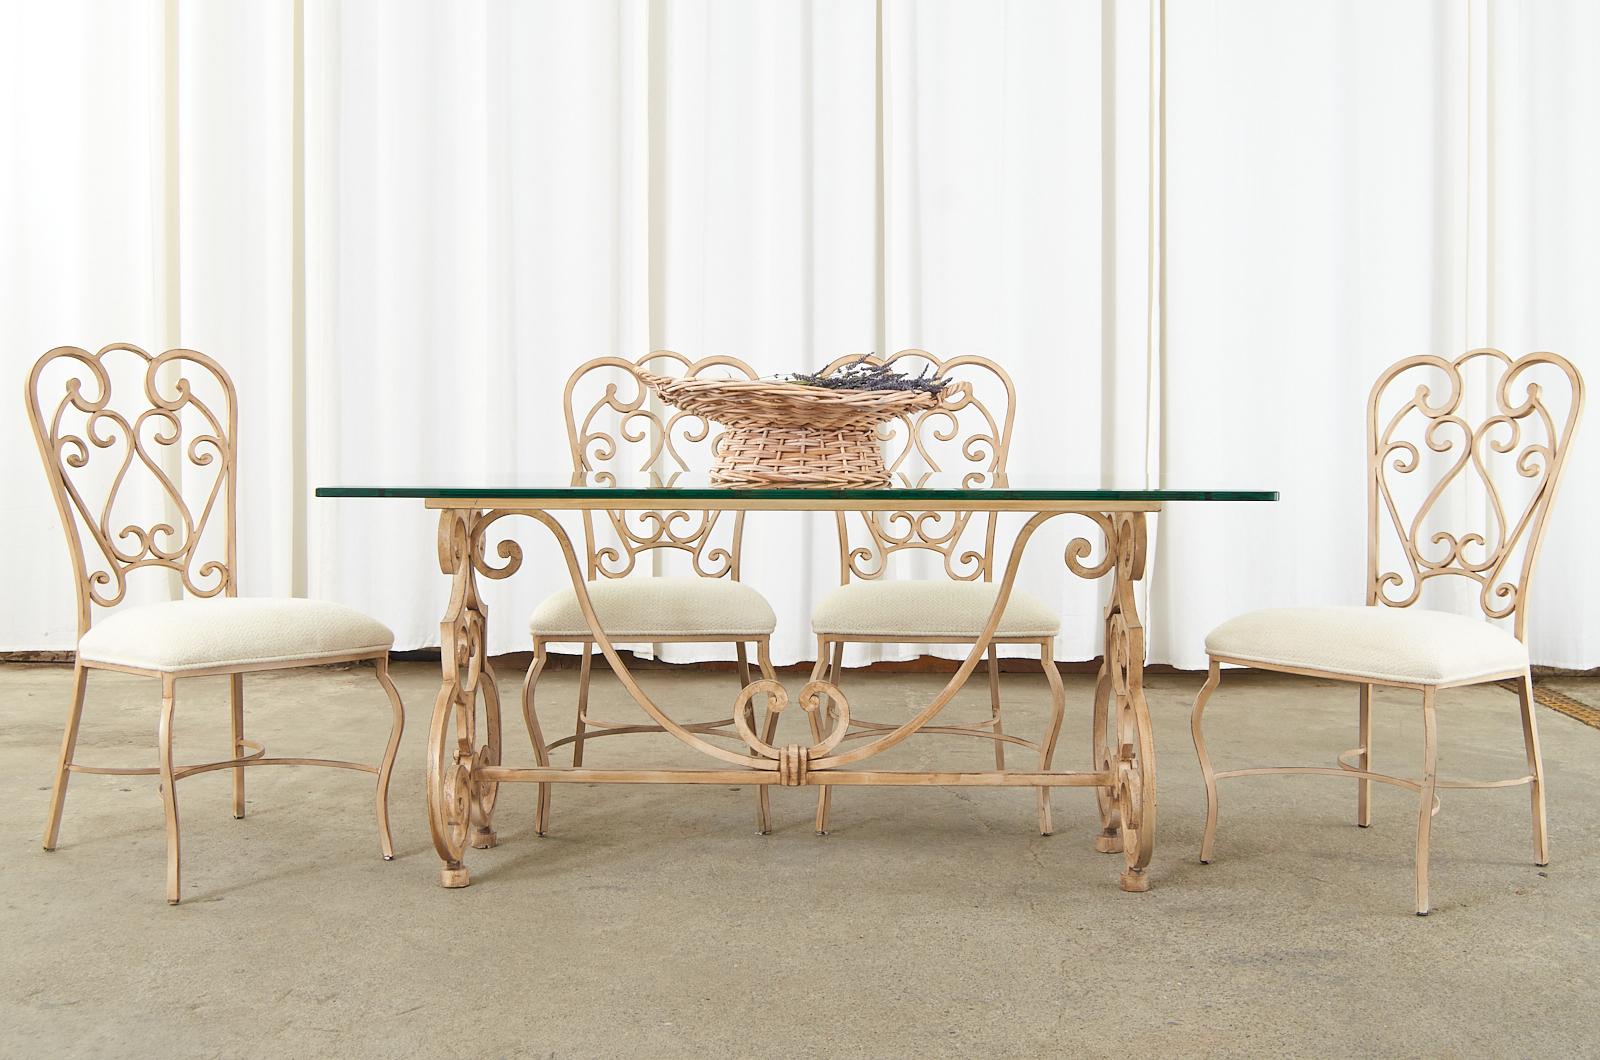 Distinctive patio and garden dining table made in the Spanish colonial revival style. The table features a thick, solid iron frame having a painted finish with an intentionally aged patina. Made in Montebello, CA. Matching chairs are also available.